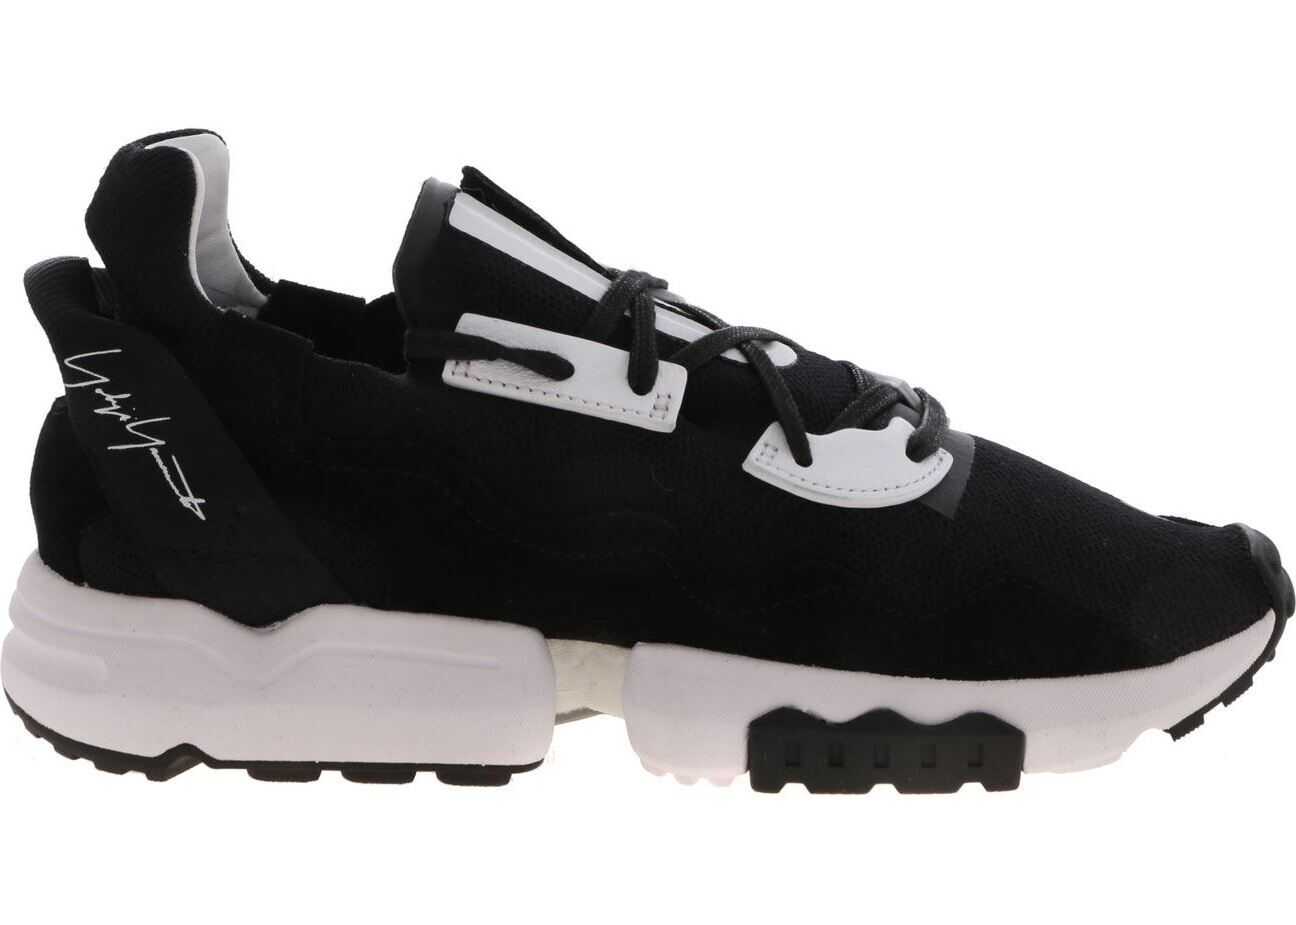 Y-3 Zx Torsion Sneakers In Black And White Black